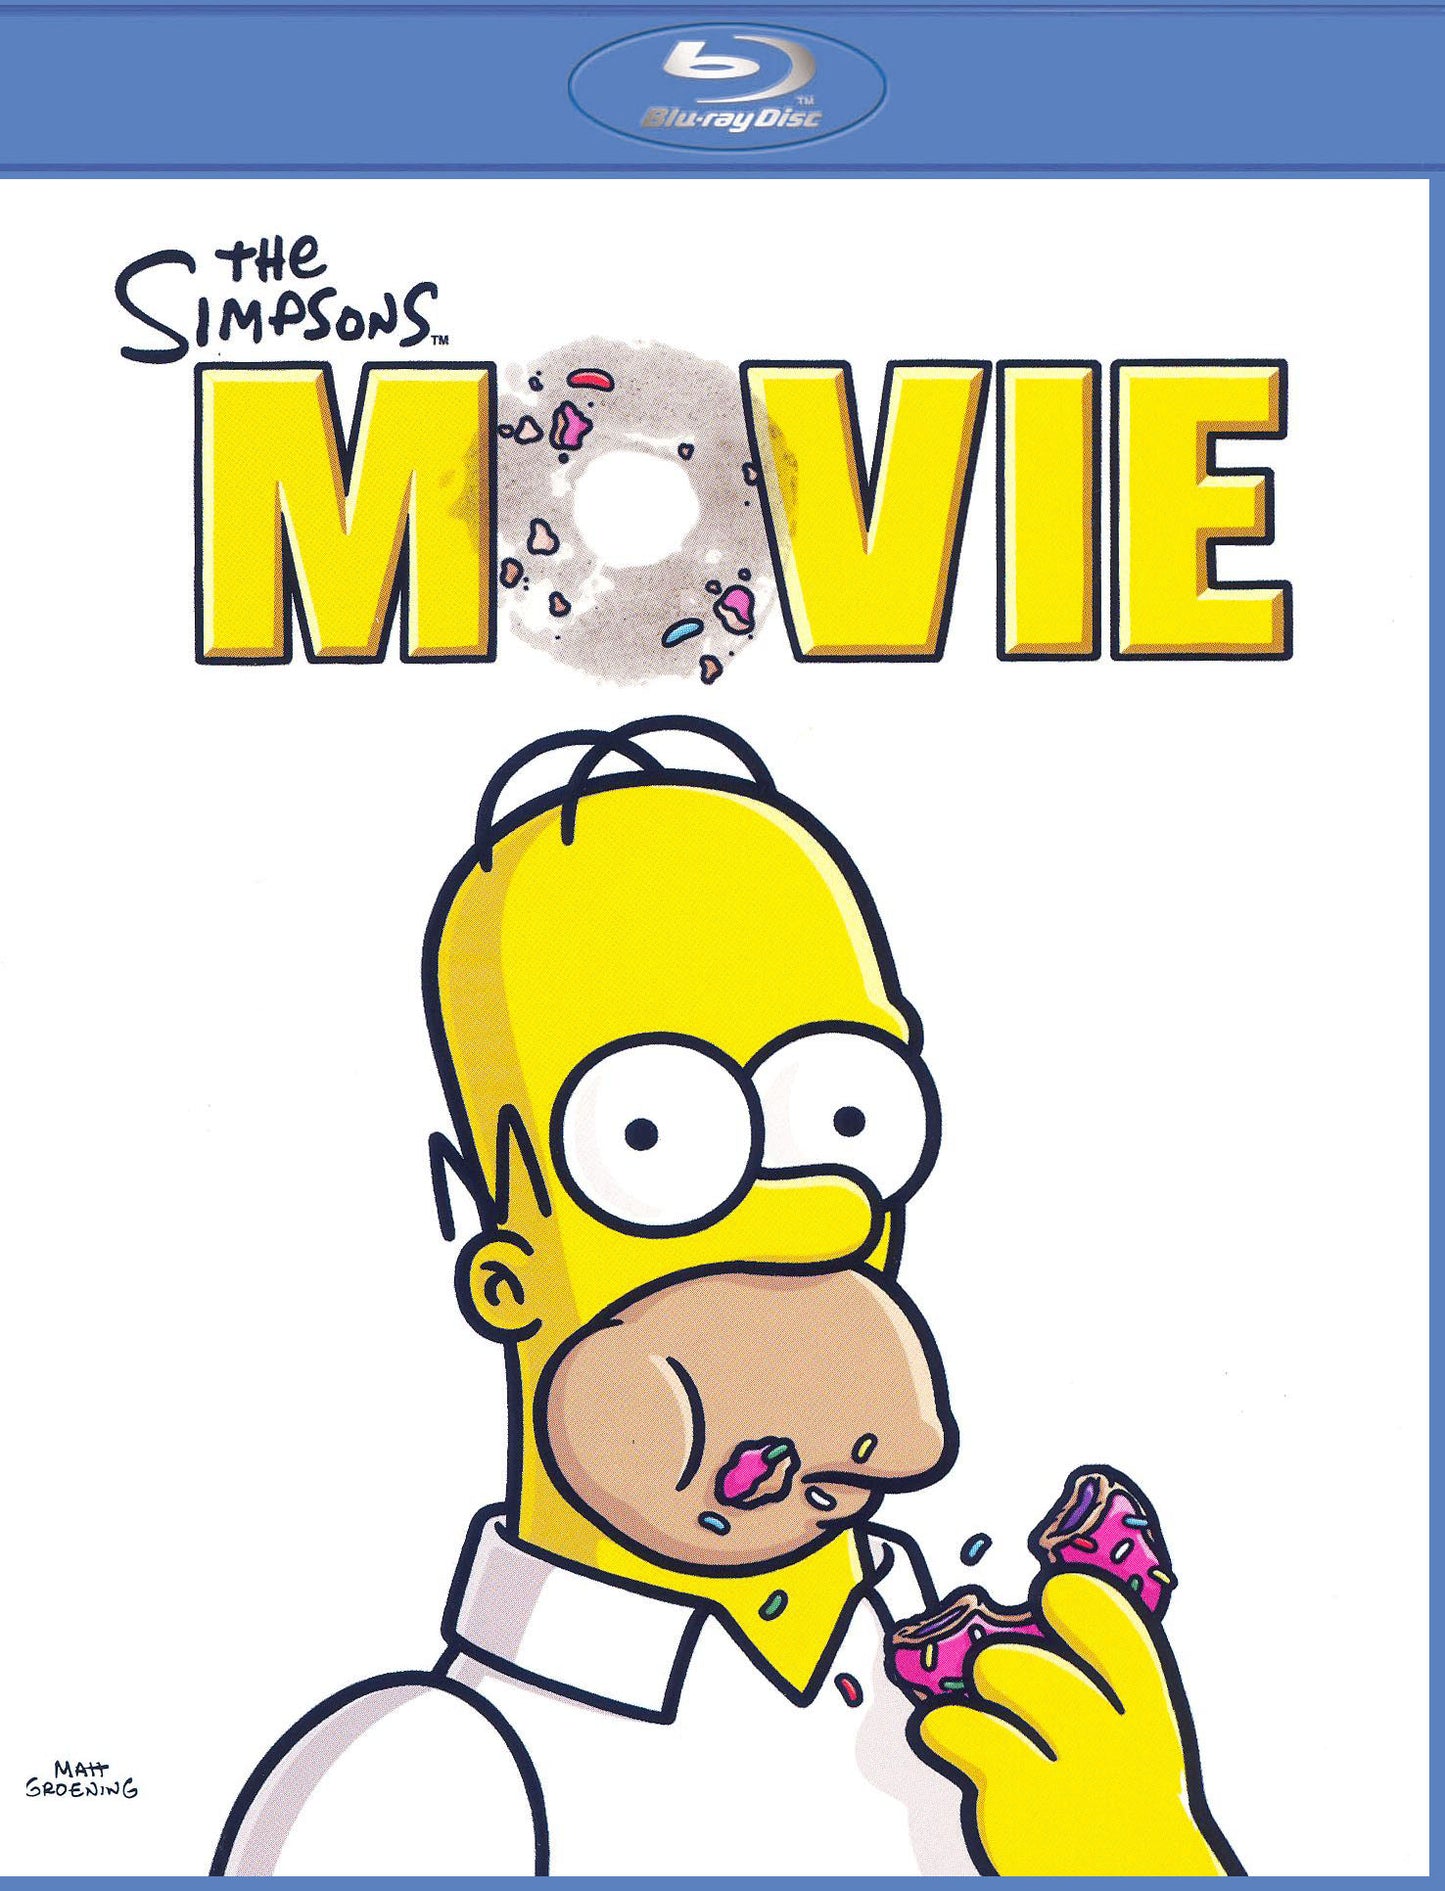 Simpsons: The Movie [Blu-ray] cover art